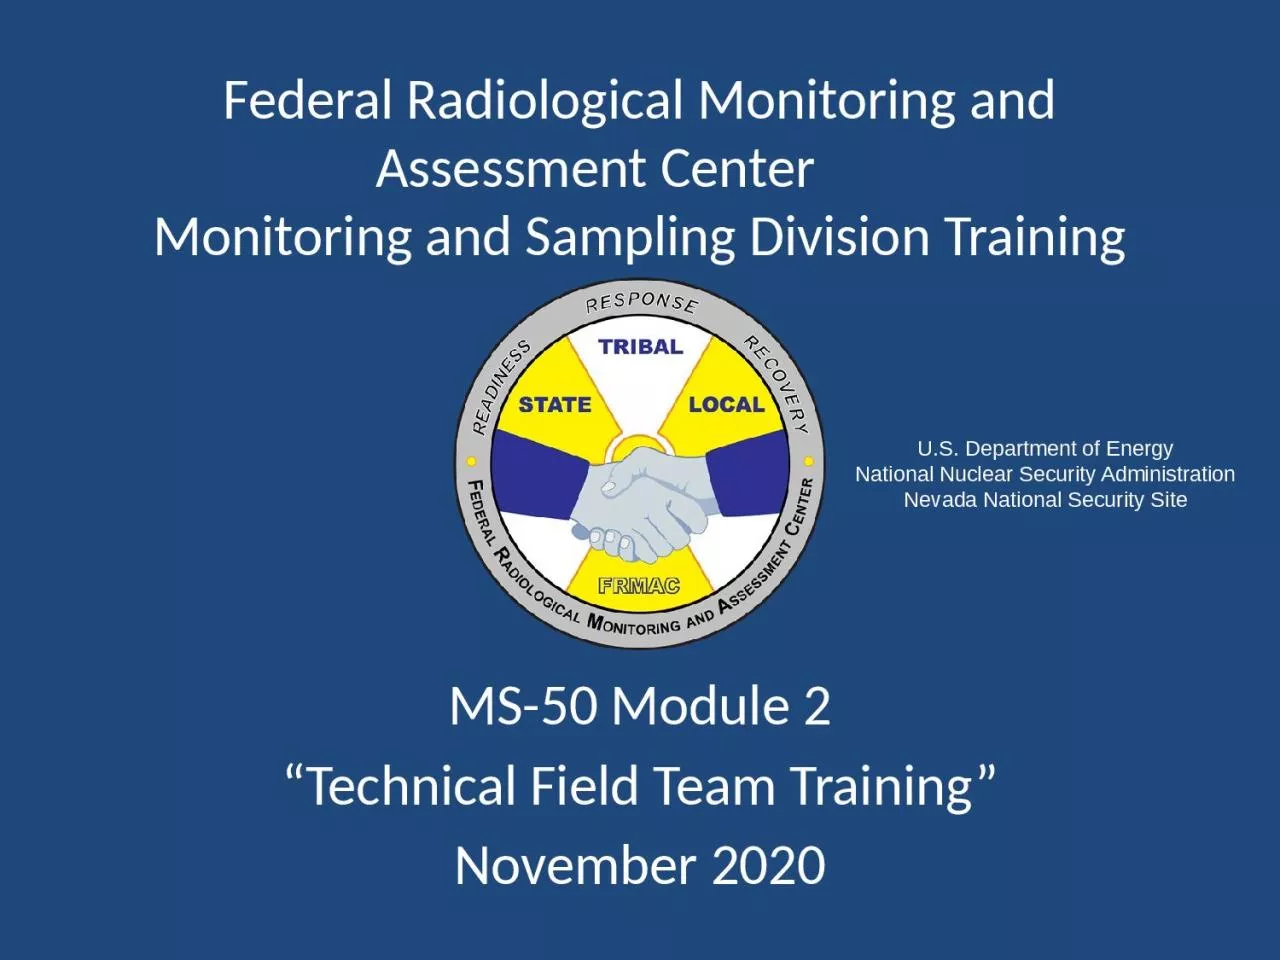 Federal Radiological Monitoring and Assessment Center